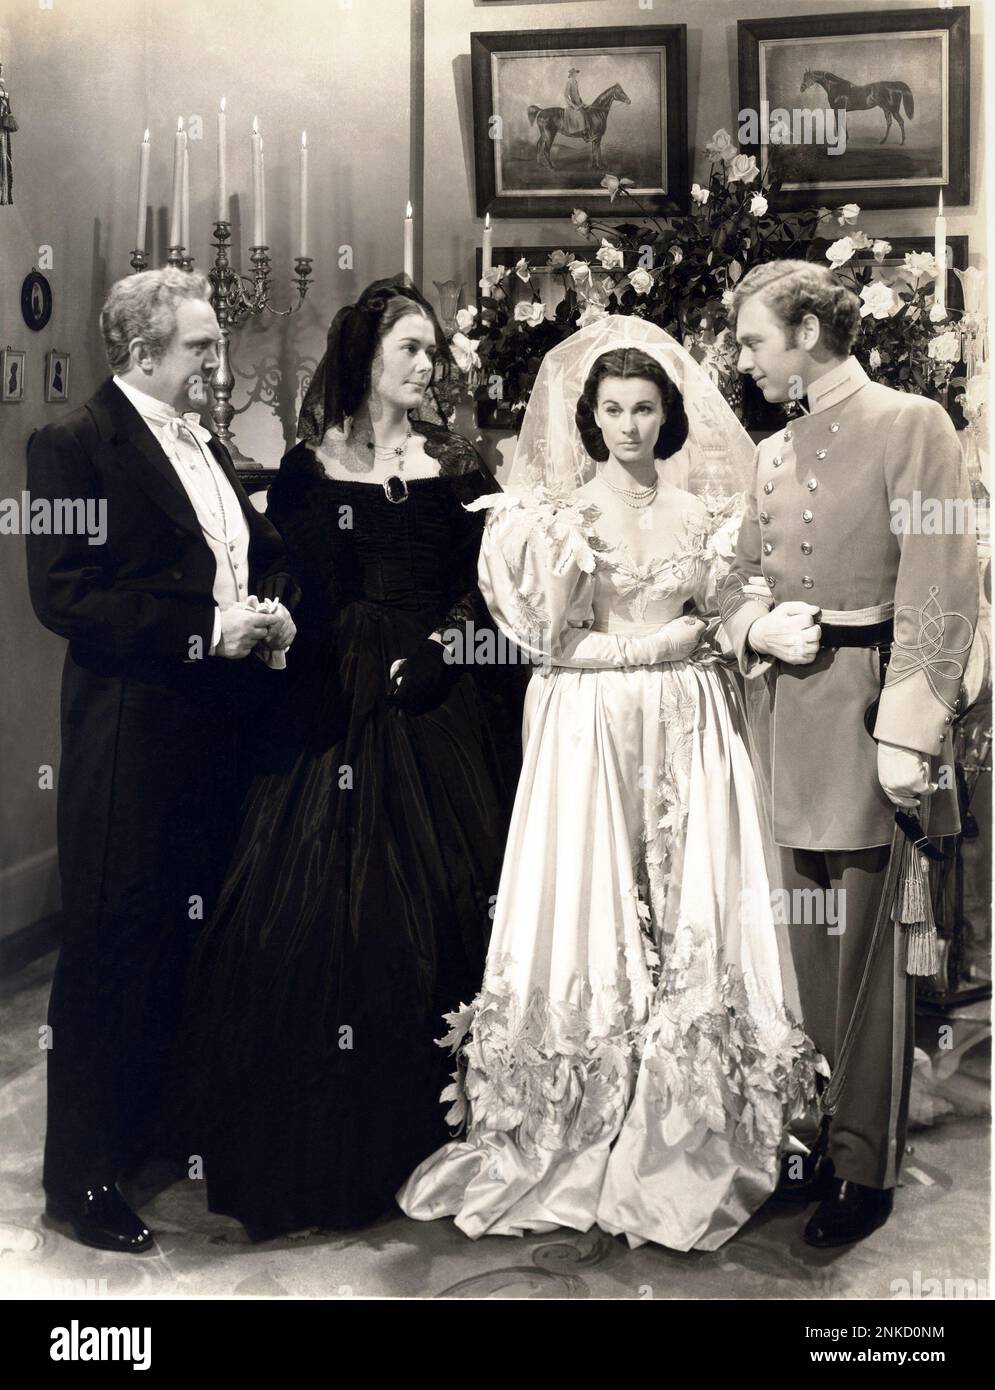 THOMAS MITCHELL GONE WITH THE WIND (1939 Stock Photo - Alamy